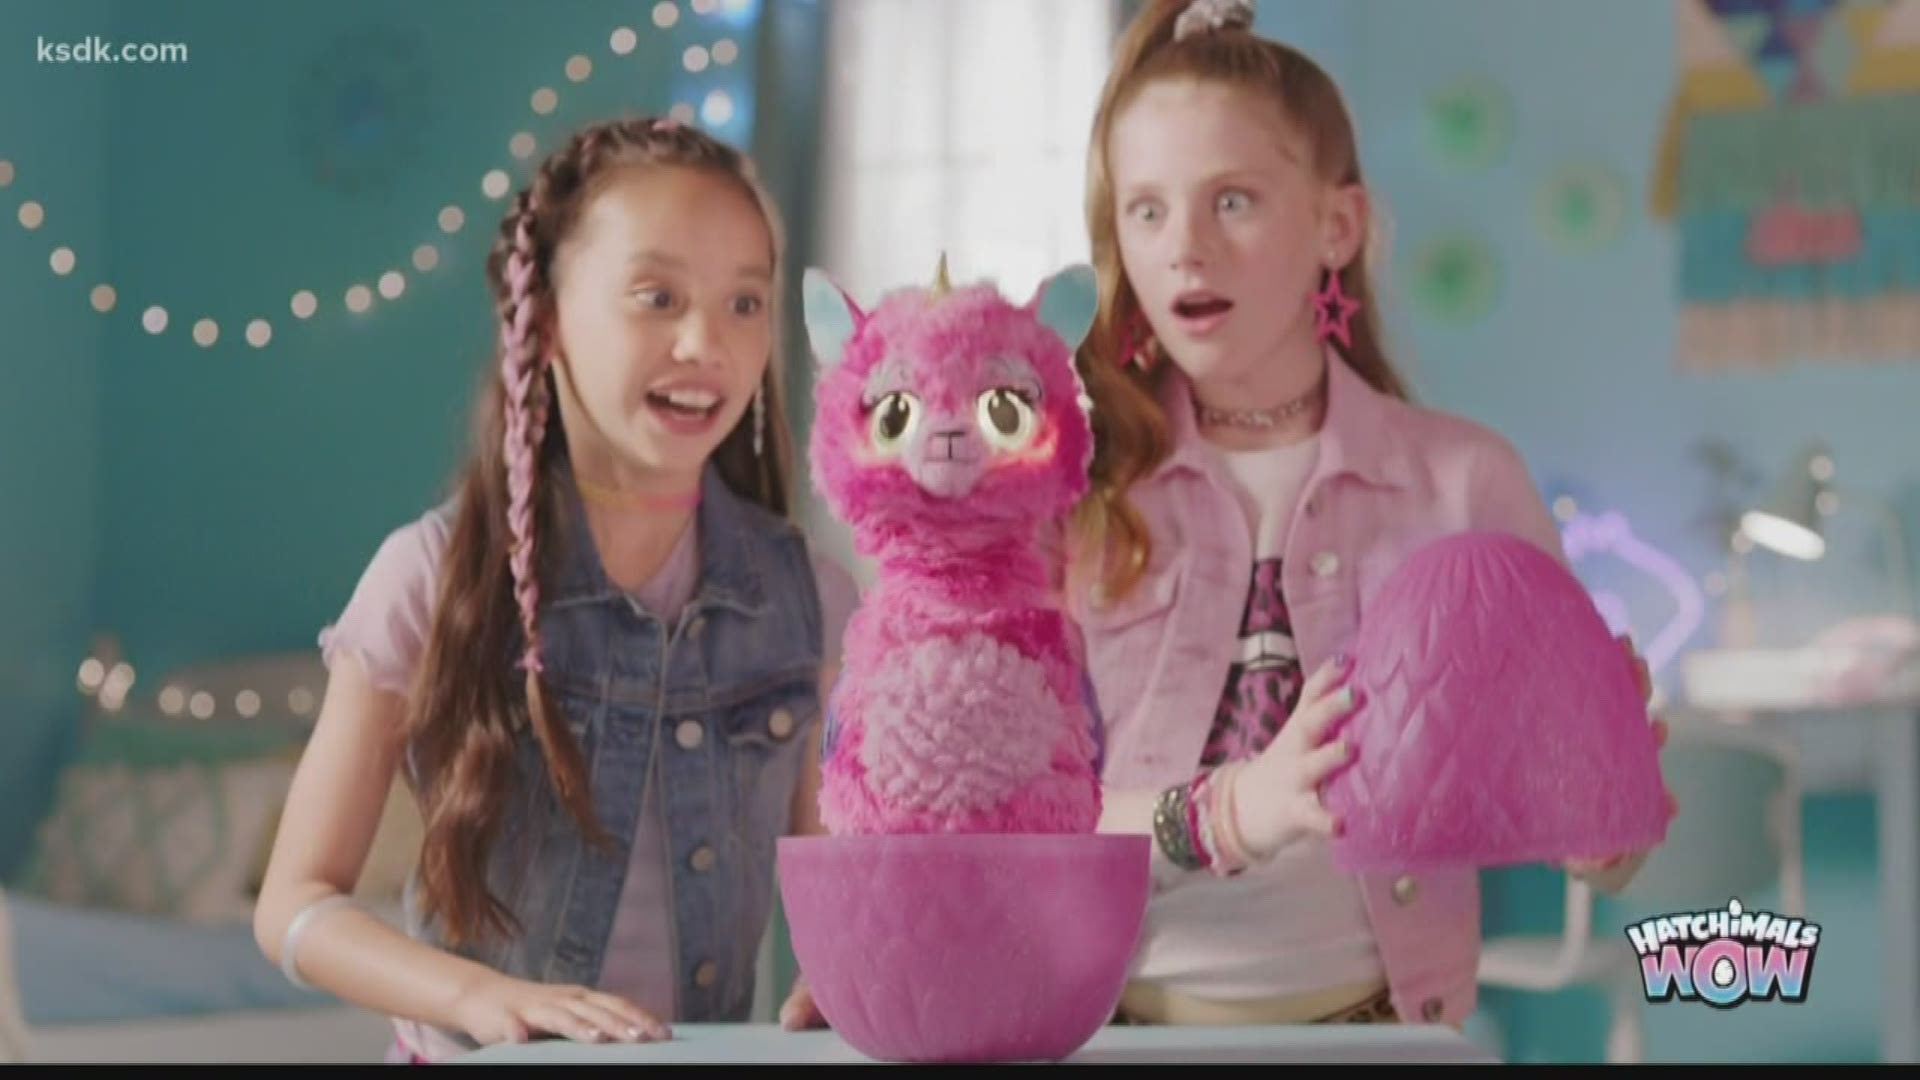 Hatchimals has new products for the holidays!